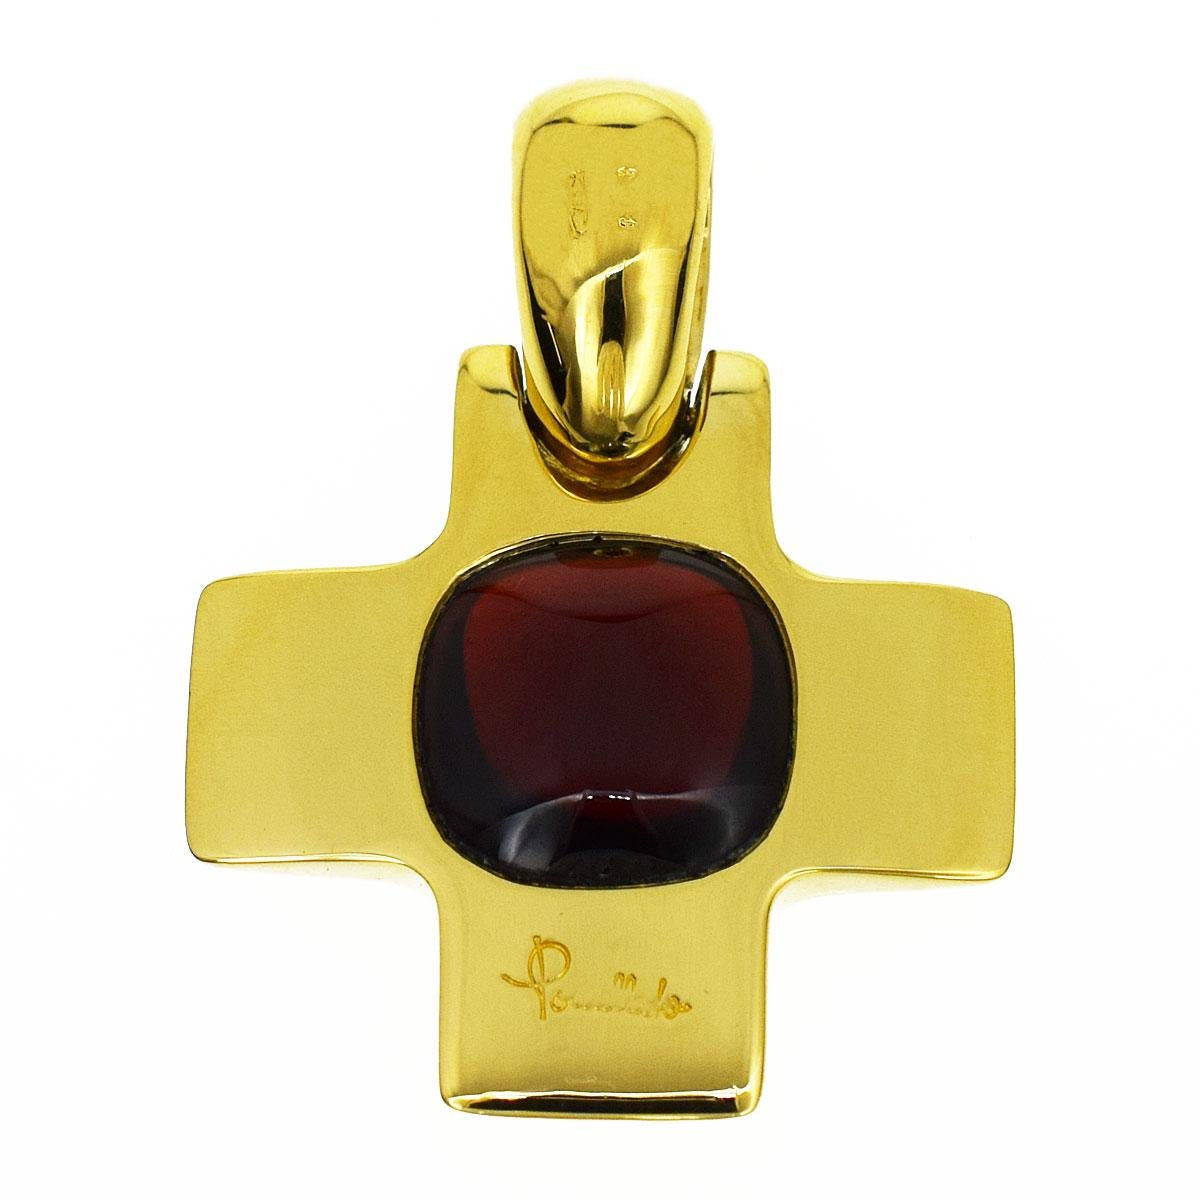 Brand:Pomellato
Name:Garnet Gold cross pendant top
Material :1P Garnet,750 K18 YG Yellow Gold
Comes with:Our original box
Size:H31mm(Including the Vatican)×W23.18mm / 1.22